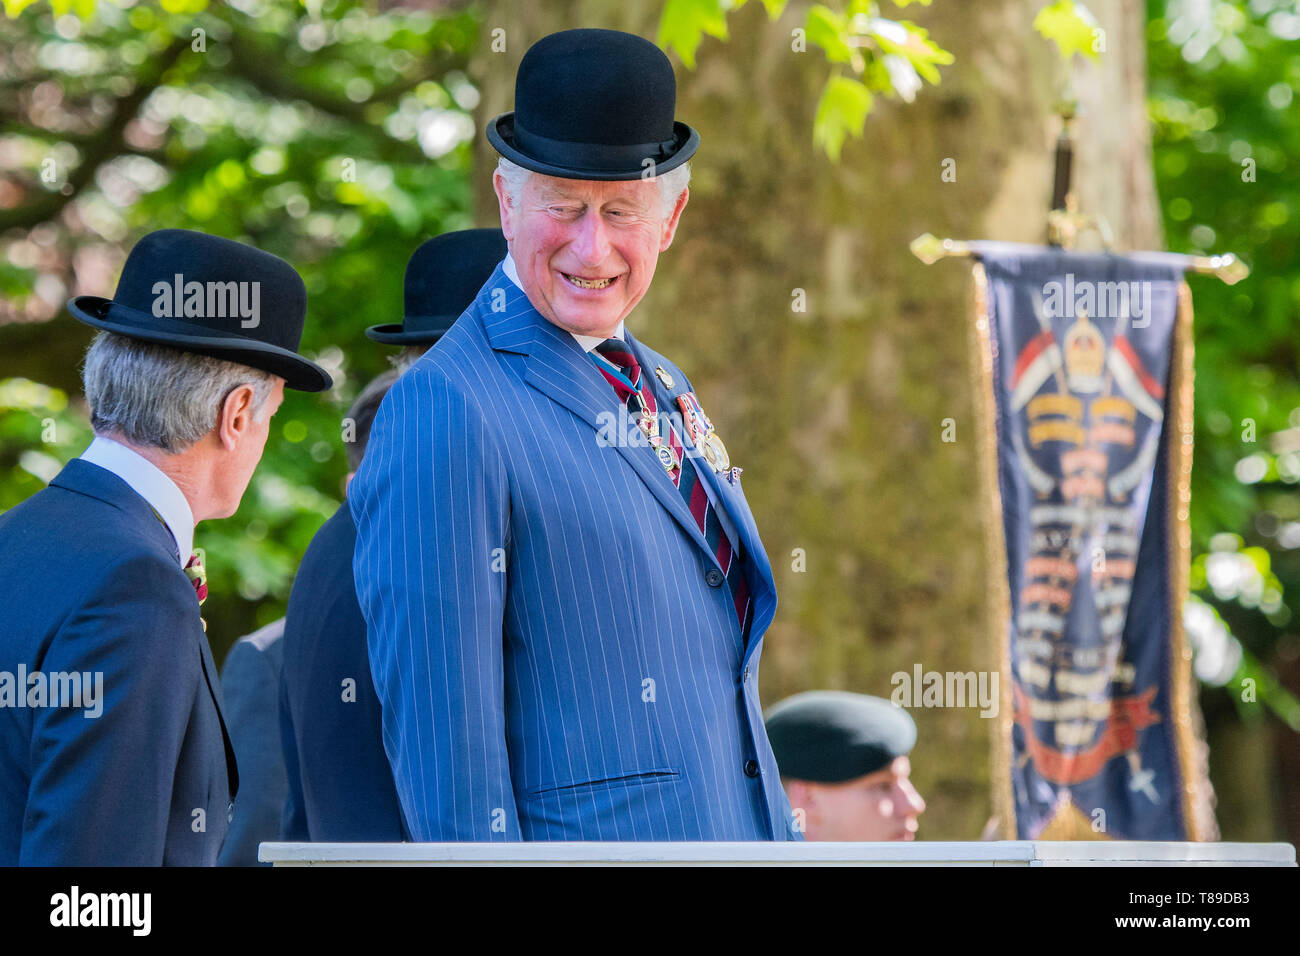 London, UK. 12th May, 2019. His Royal Highness The Prince of Wales, Field Marshal, Colonel in Chief 1ST The Queen’s Dragoon Guards, takes the salute at the Annual Parade and Service of The Combined Cavalry Old Comrades Association at the Cavalry Memorial adjacent to the Bandstand in Hyde Park. It is 95 years on from the unveiling and dedication of its memorial in Hyde Park. Credit: Guy Bell/Alamy Live News Stock Photo